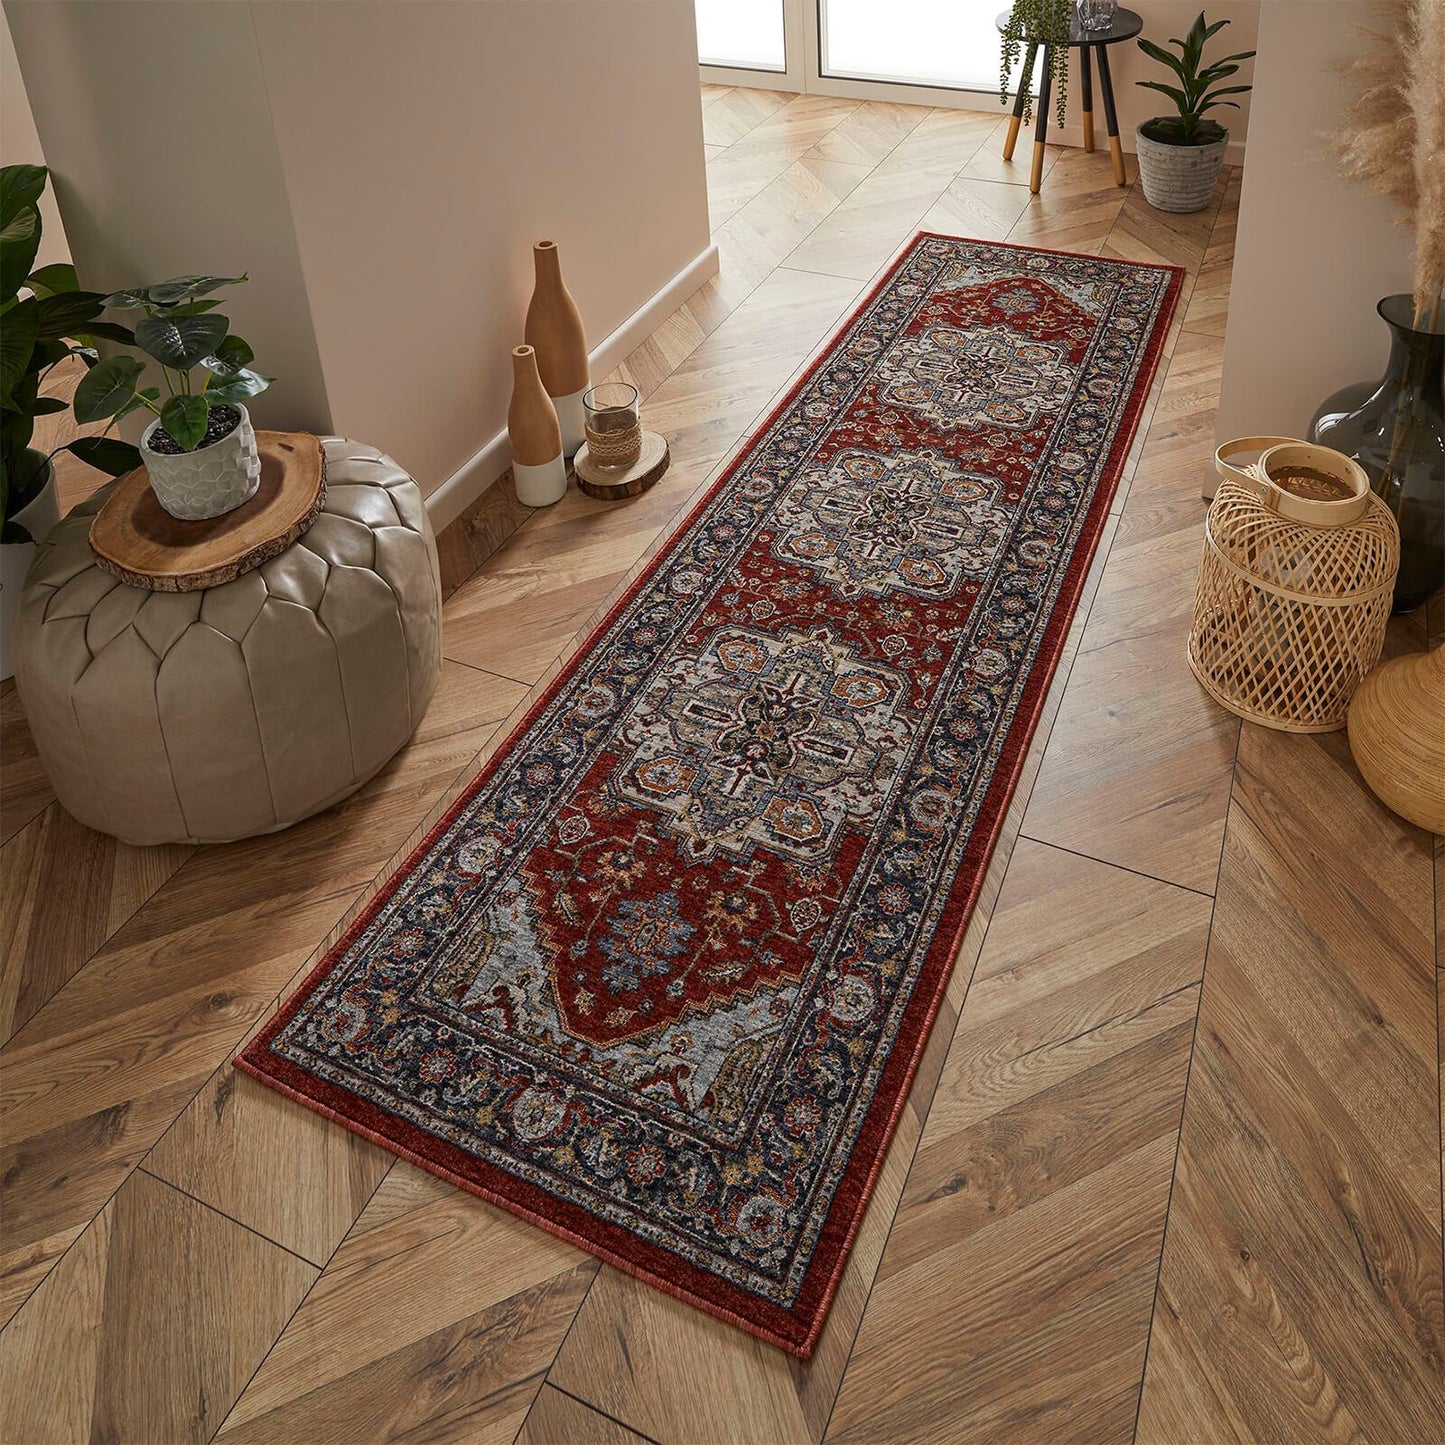 Sarouk 1144 R Red, Blue and Cream Traditional Rugs